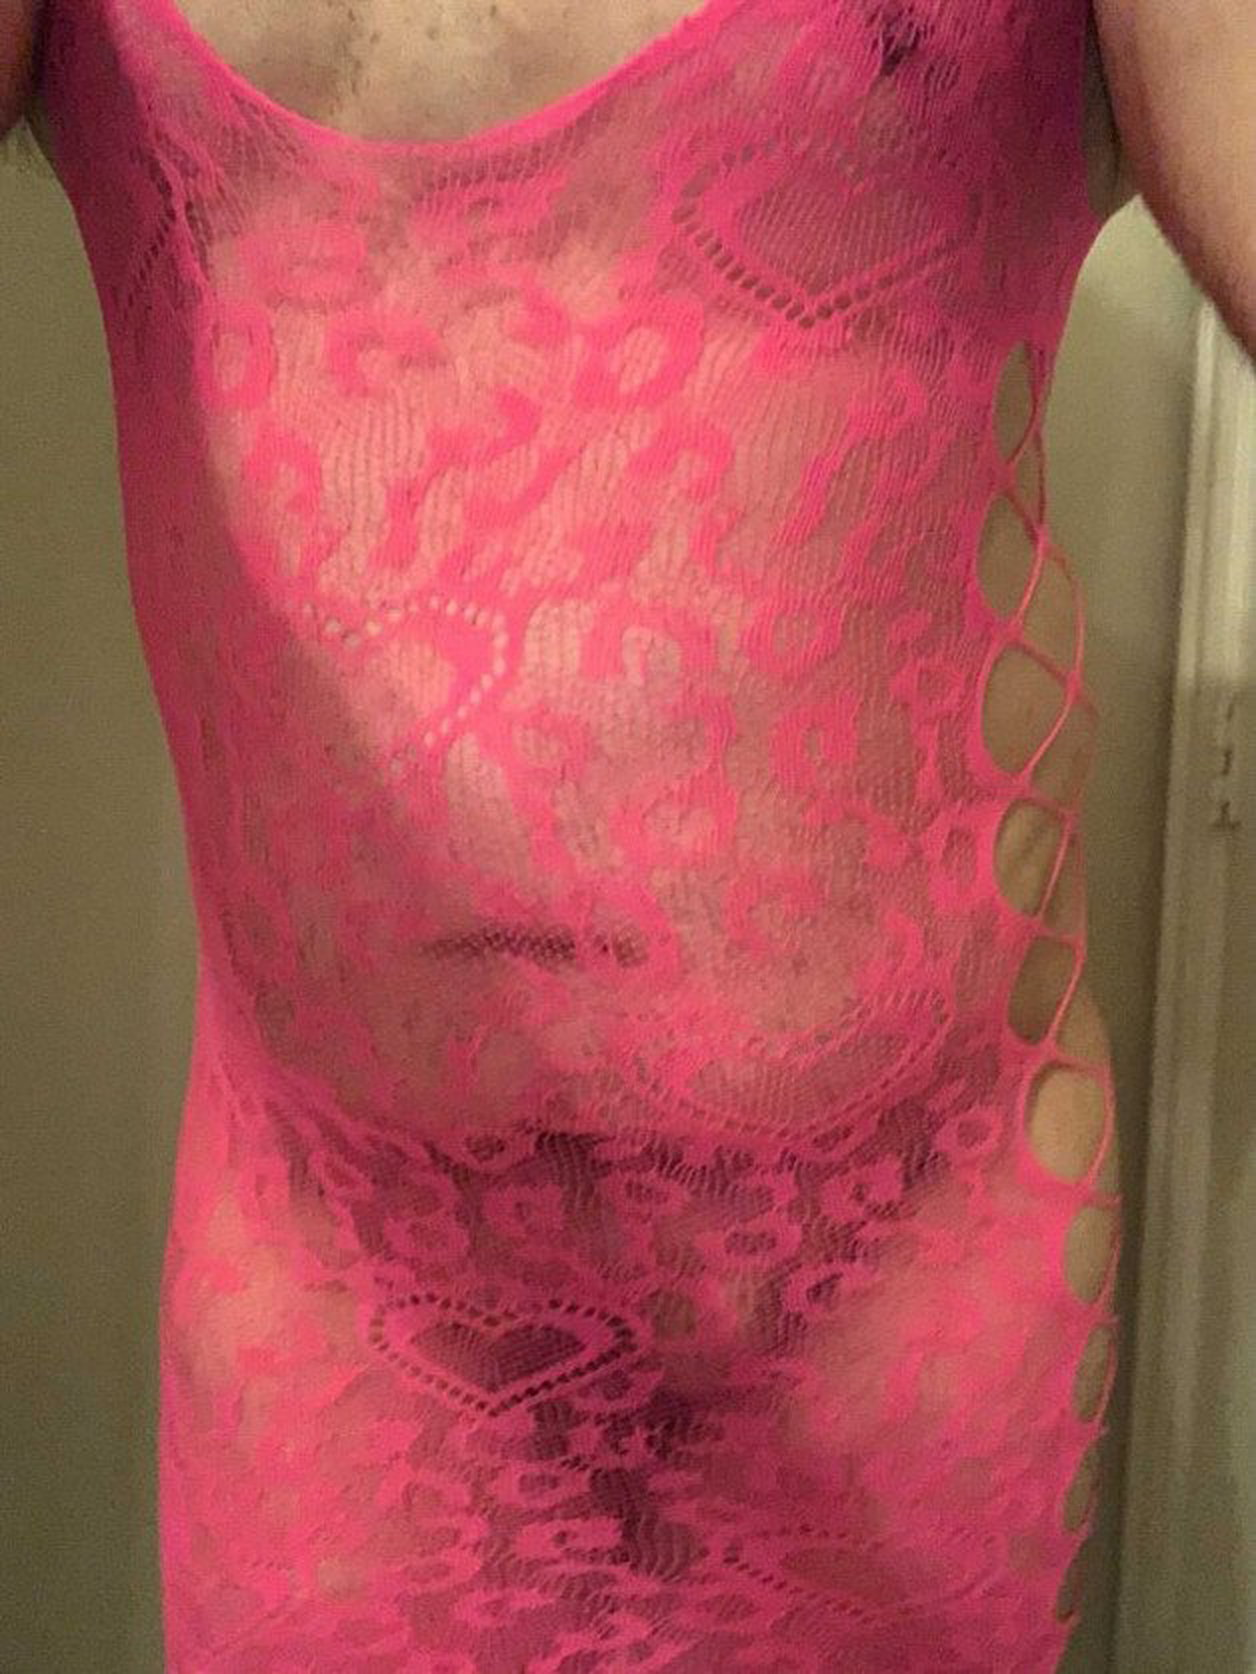 Photo by ls sissy with the username @ls_sissy, posted on July 3, 2021 and the text says 'small dick sissy fag. attracted to women.  but not goid enough.  so i need cock and female humiliation.  thank you women for helping me accept my sissy loser status in life.'